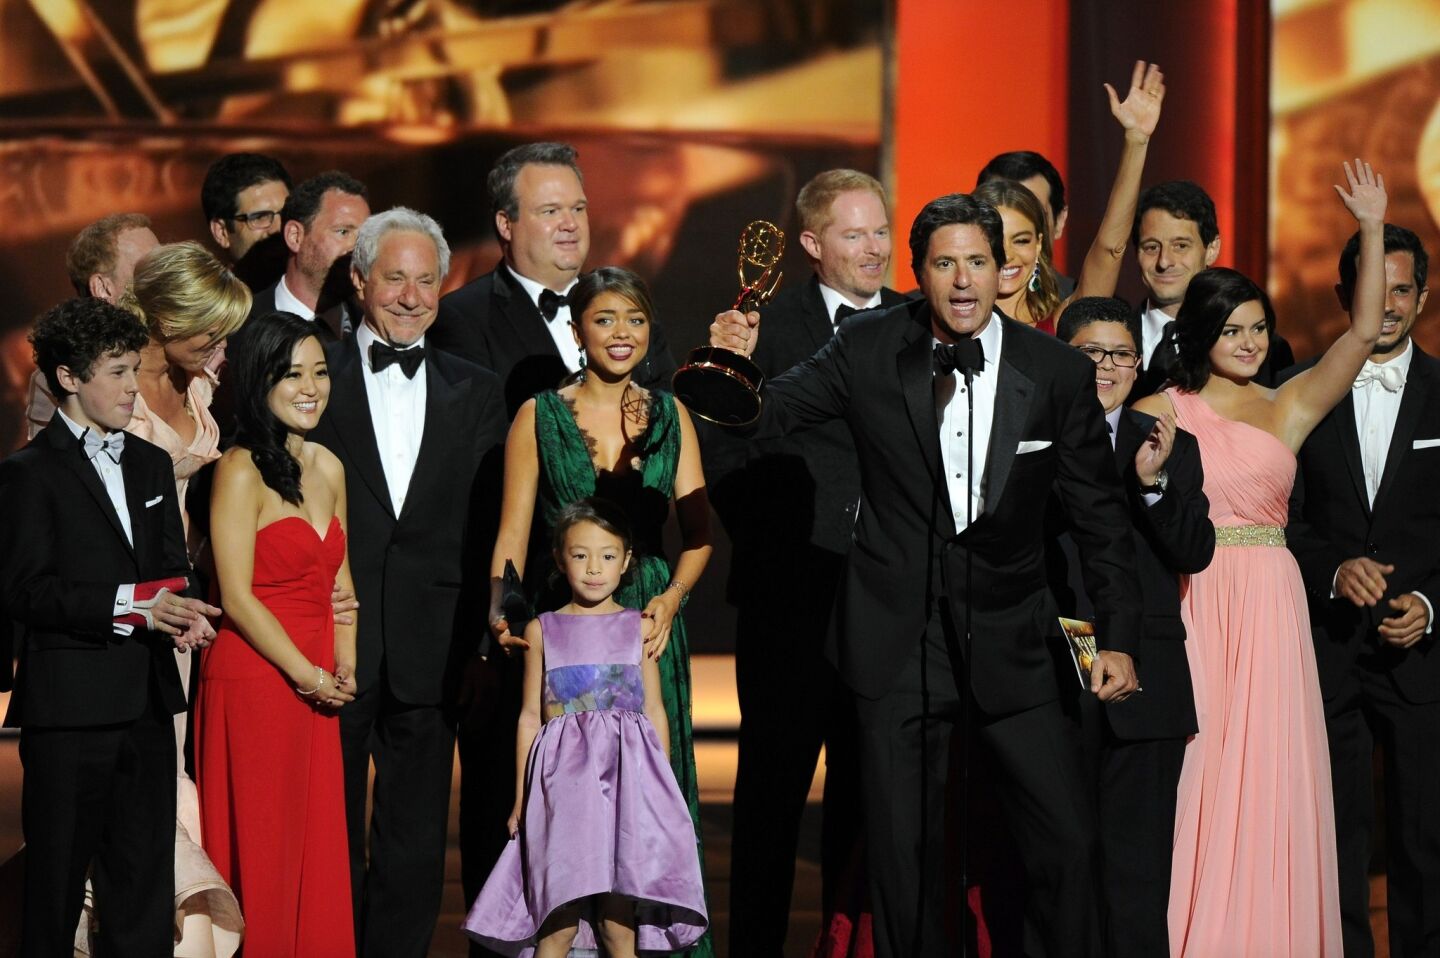 "Modern Family" won the Emmy for best comedy series, and "Breaking Bad" won for best drama series. Neither show was a surprise win, but "Family" executive producer Steve Levitan summed up the feelings perfectly with his speech: "This may be the saddest Emmys ever, but we couldn't be happier."